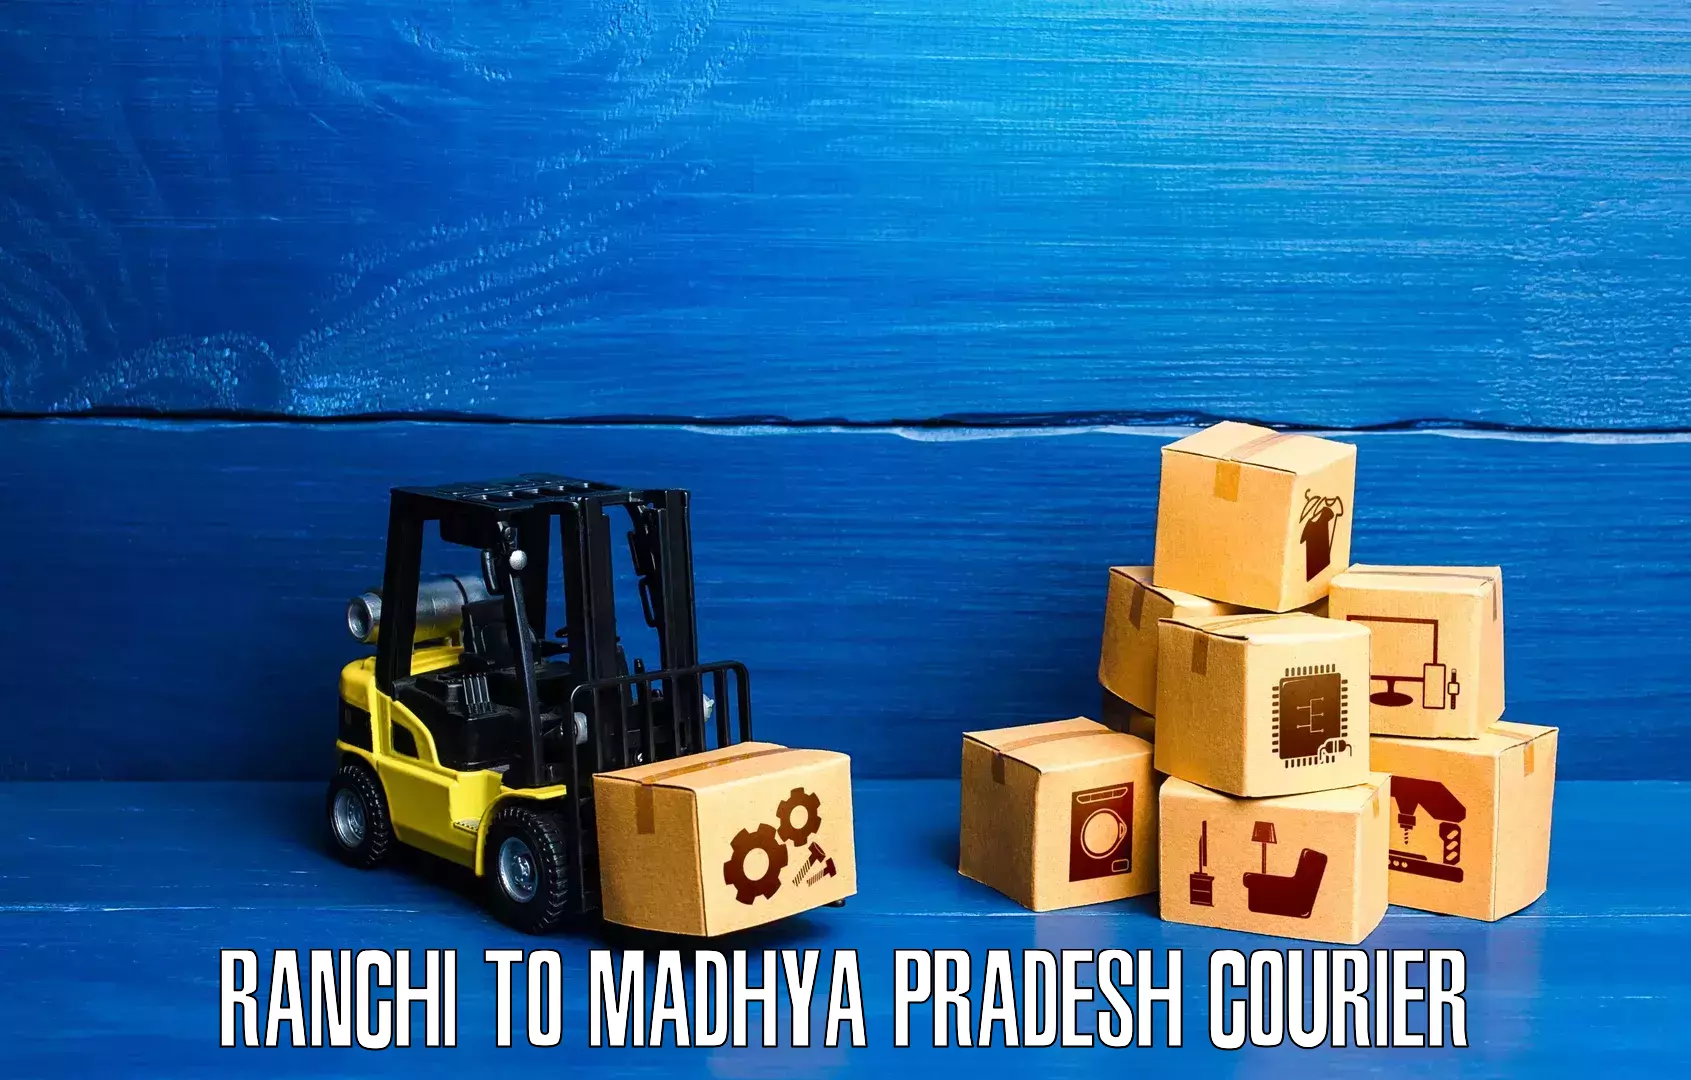 Express delivery capabilities Ranchi to Jabalpur